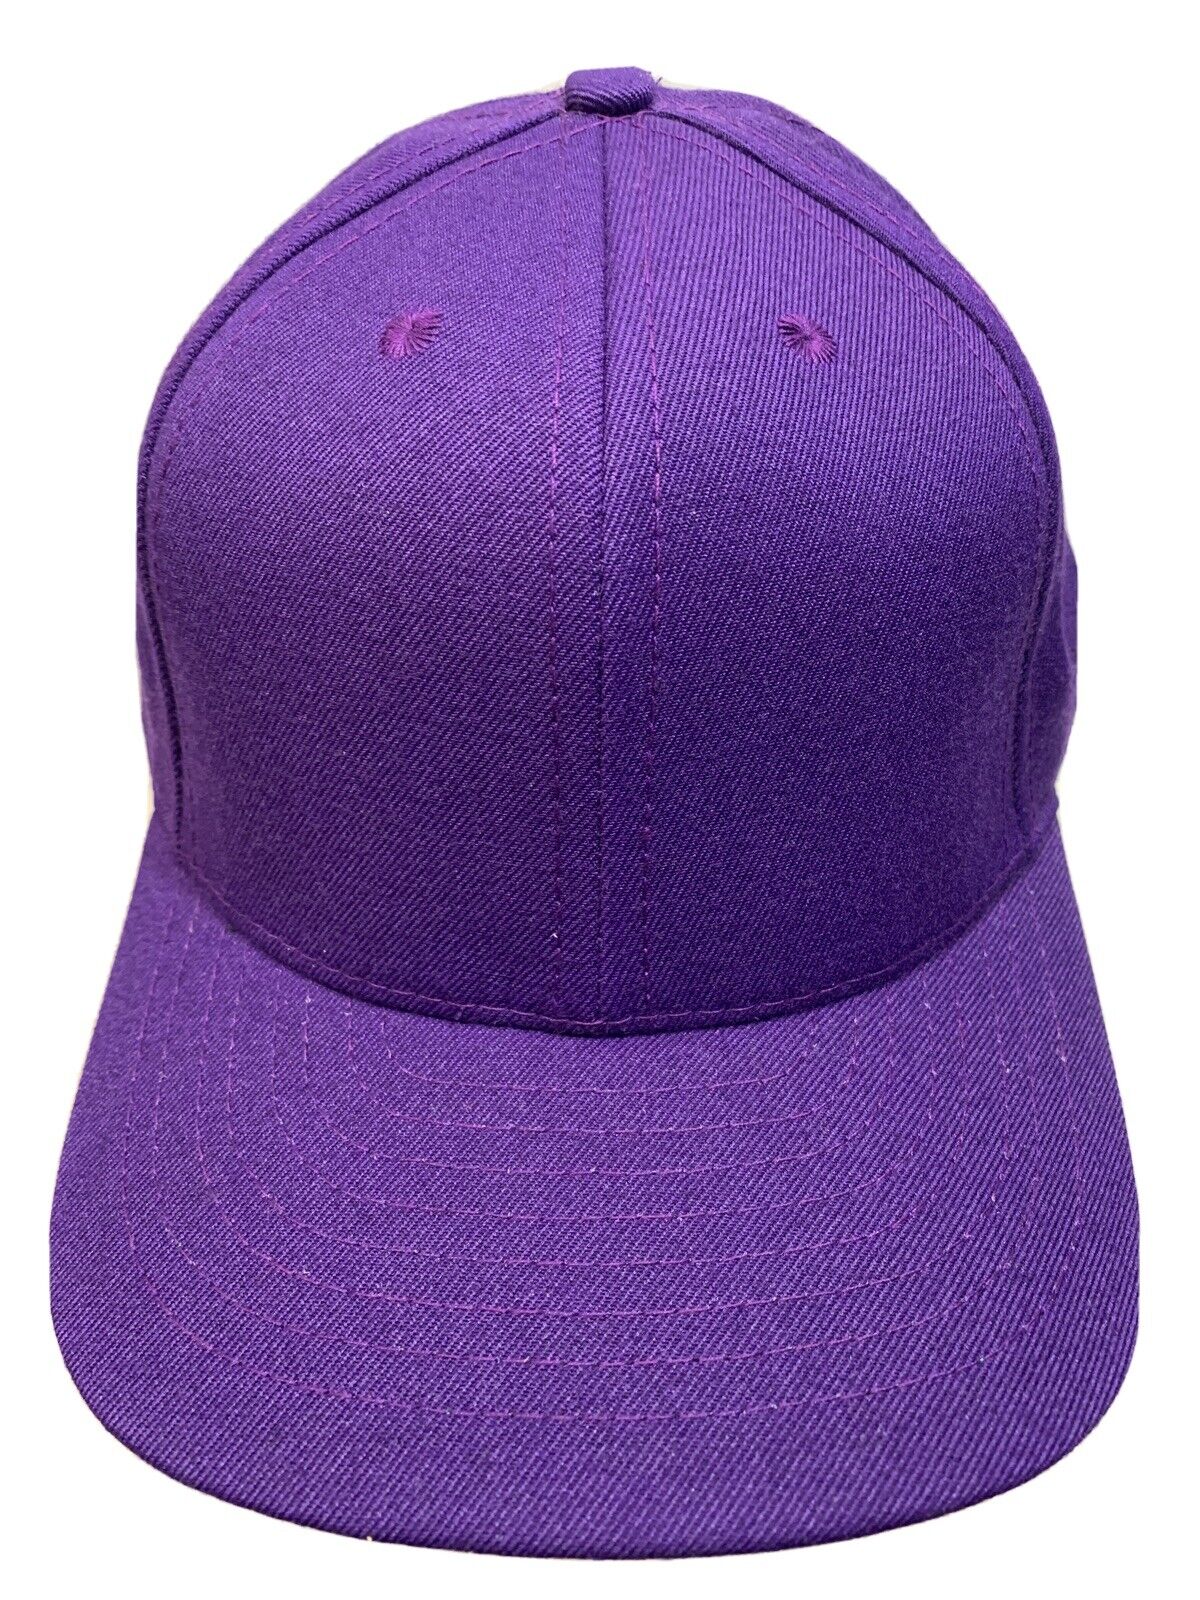 D SPORT Blank Purple Fitted Size 7 1/8 Adult Baseball Ball Cap Hat 